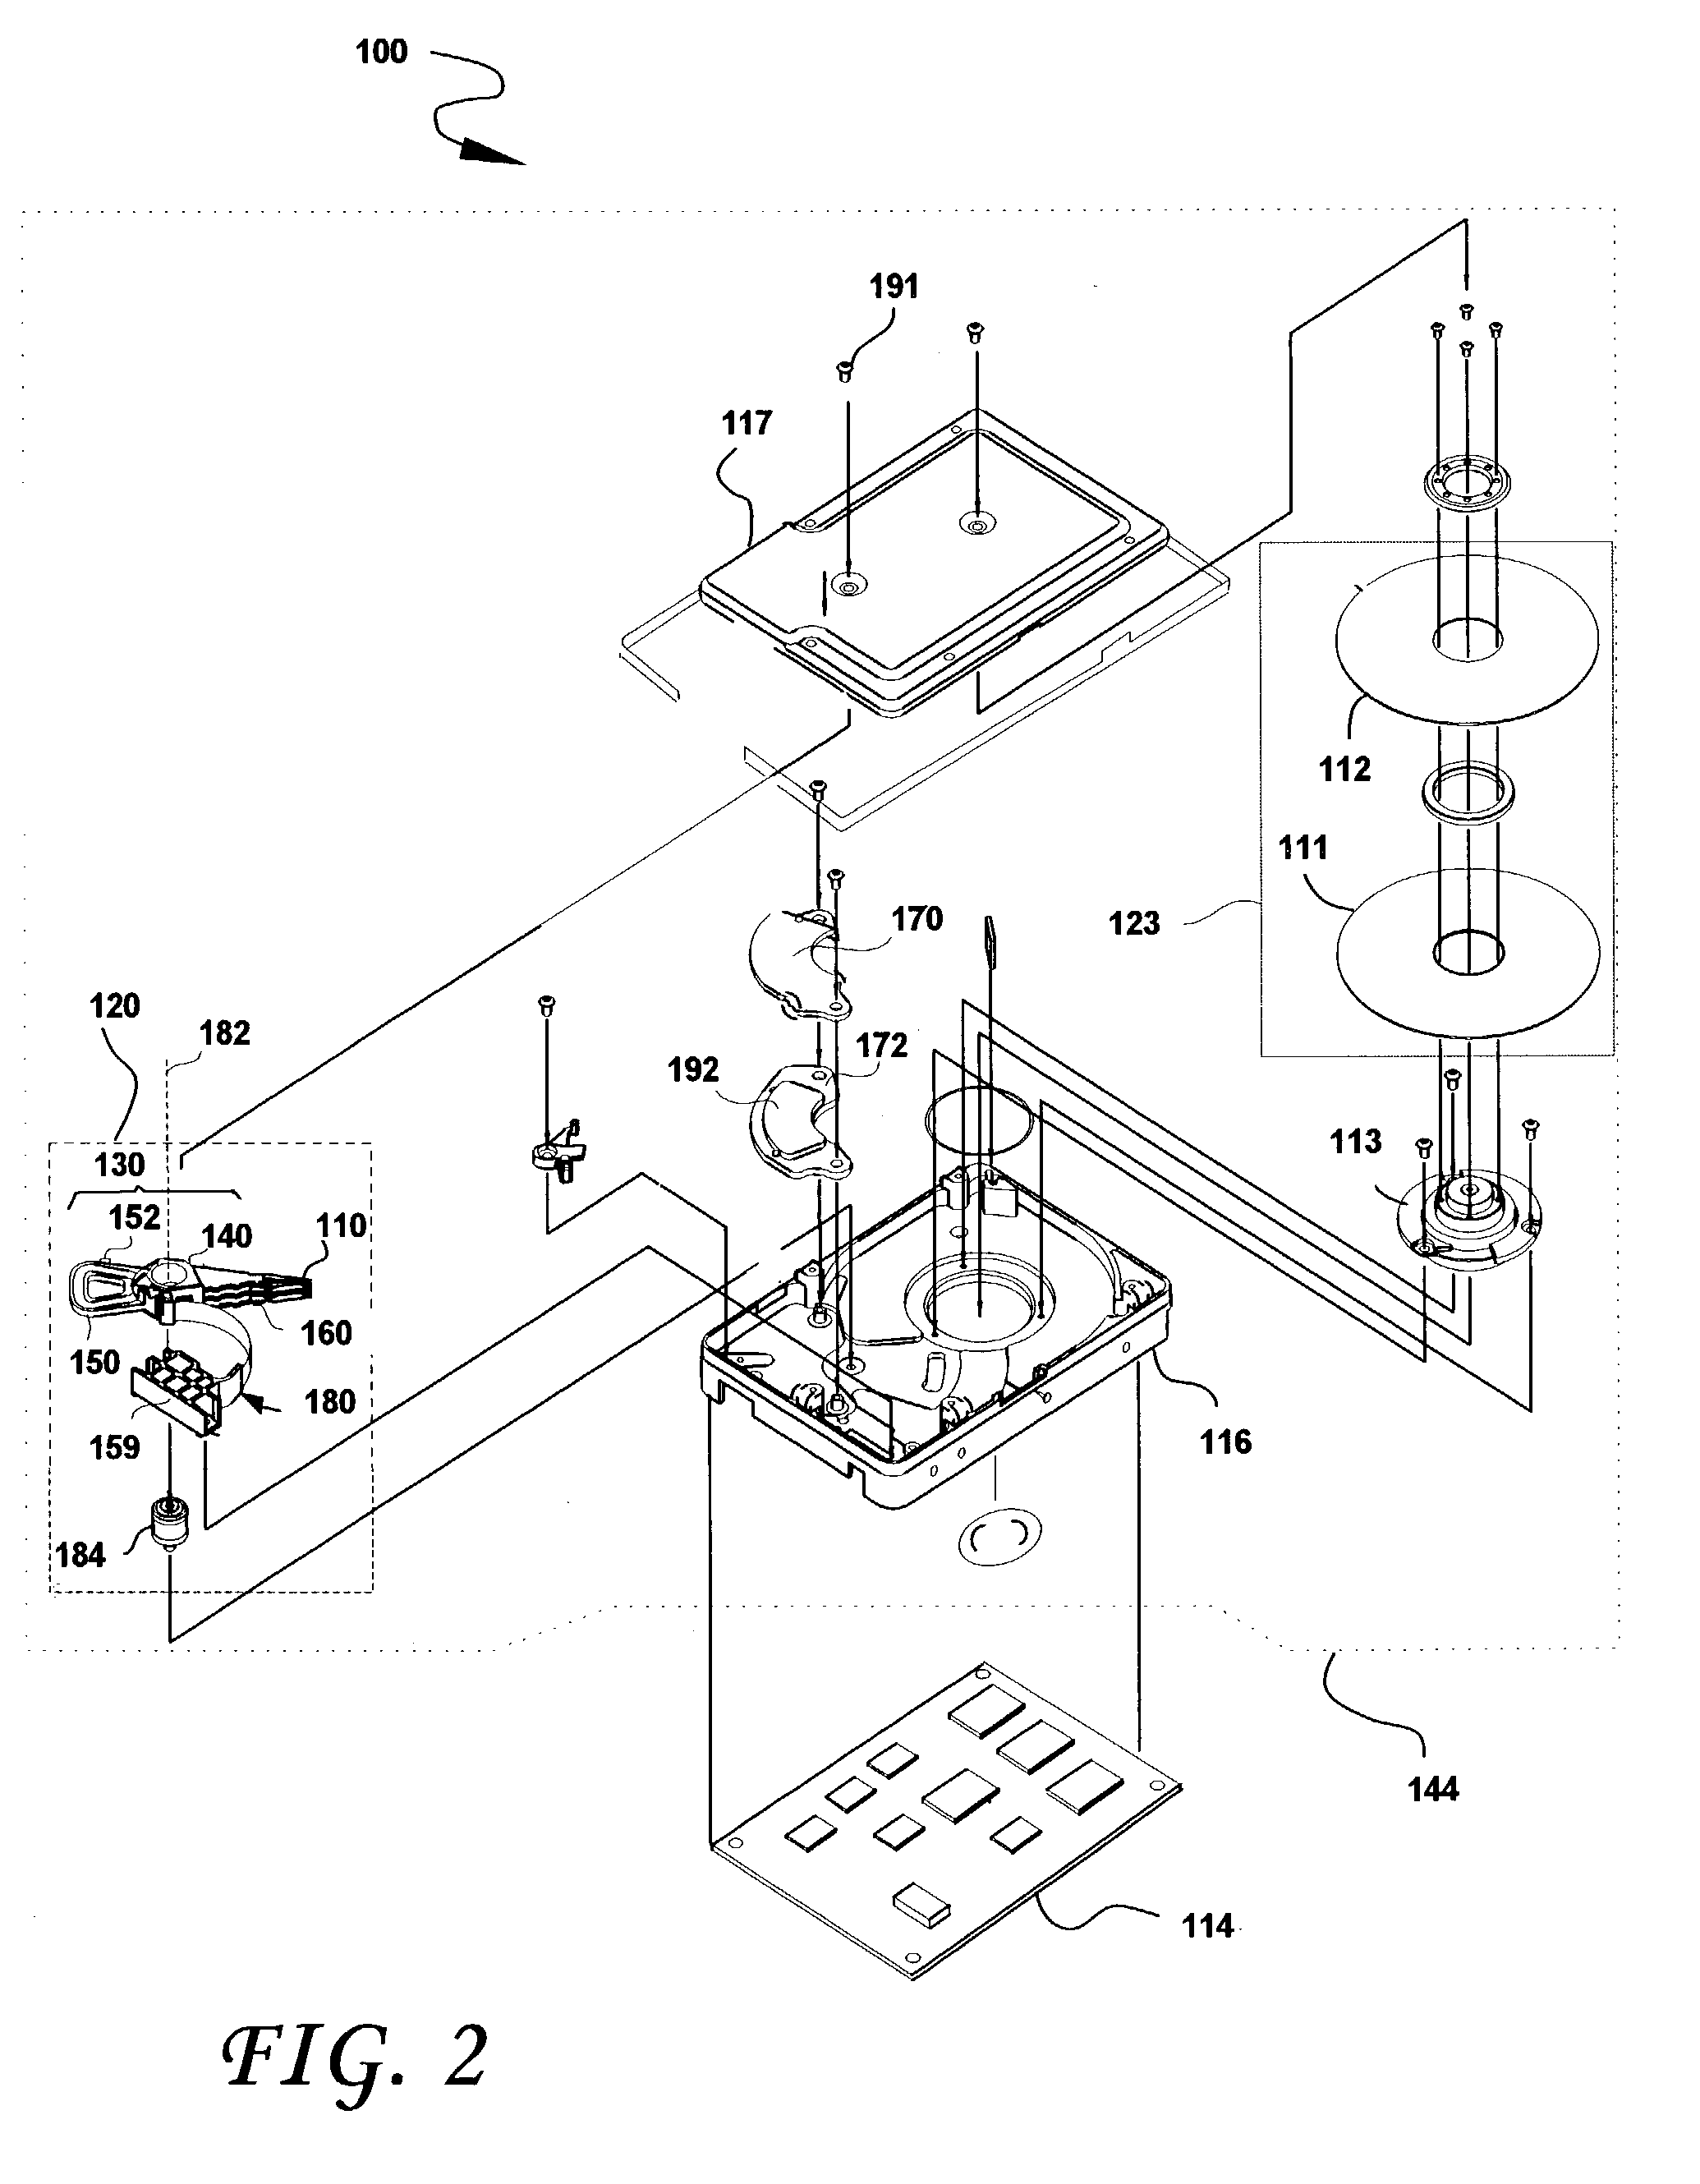 Cleating features to improve adhesive interface between an actuator tang and a tang-supporting surface of an actuator assembly of a hard disk drive